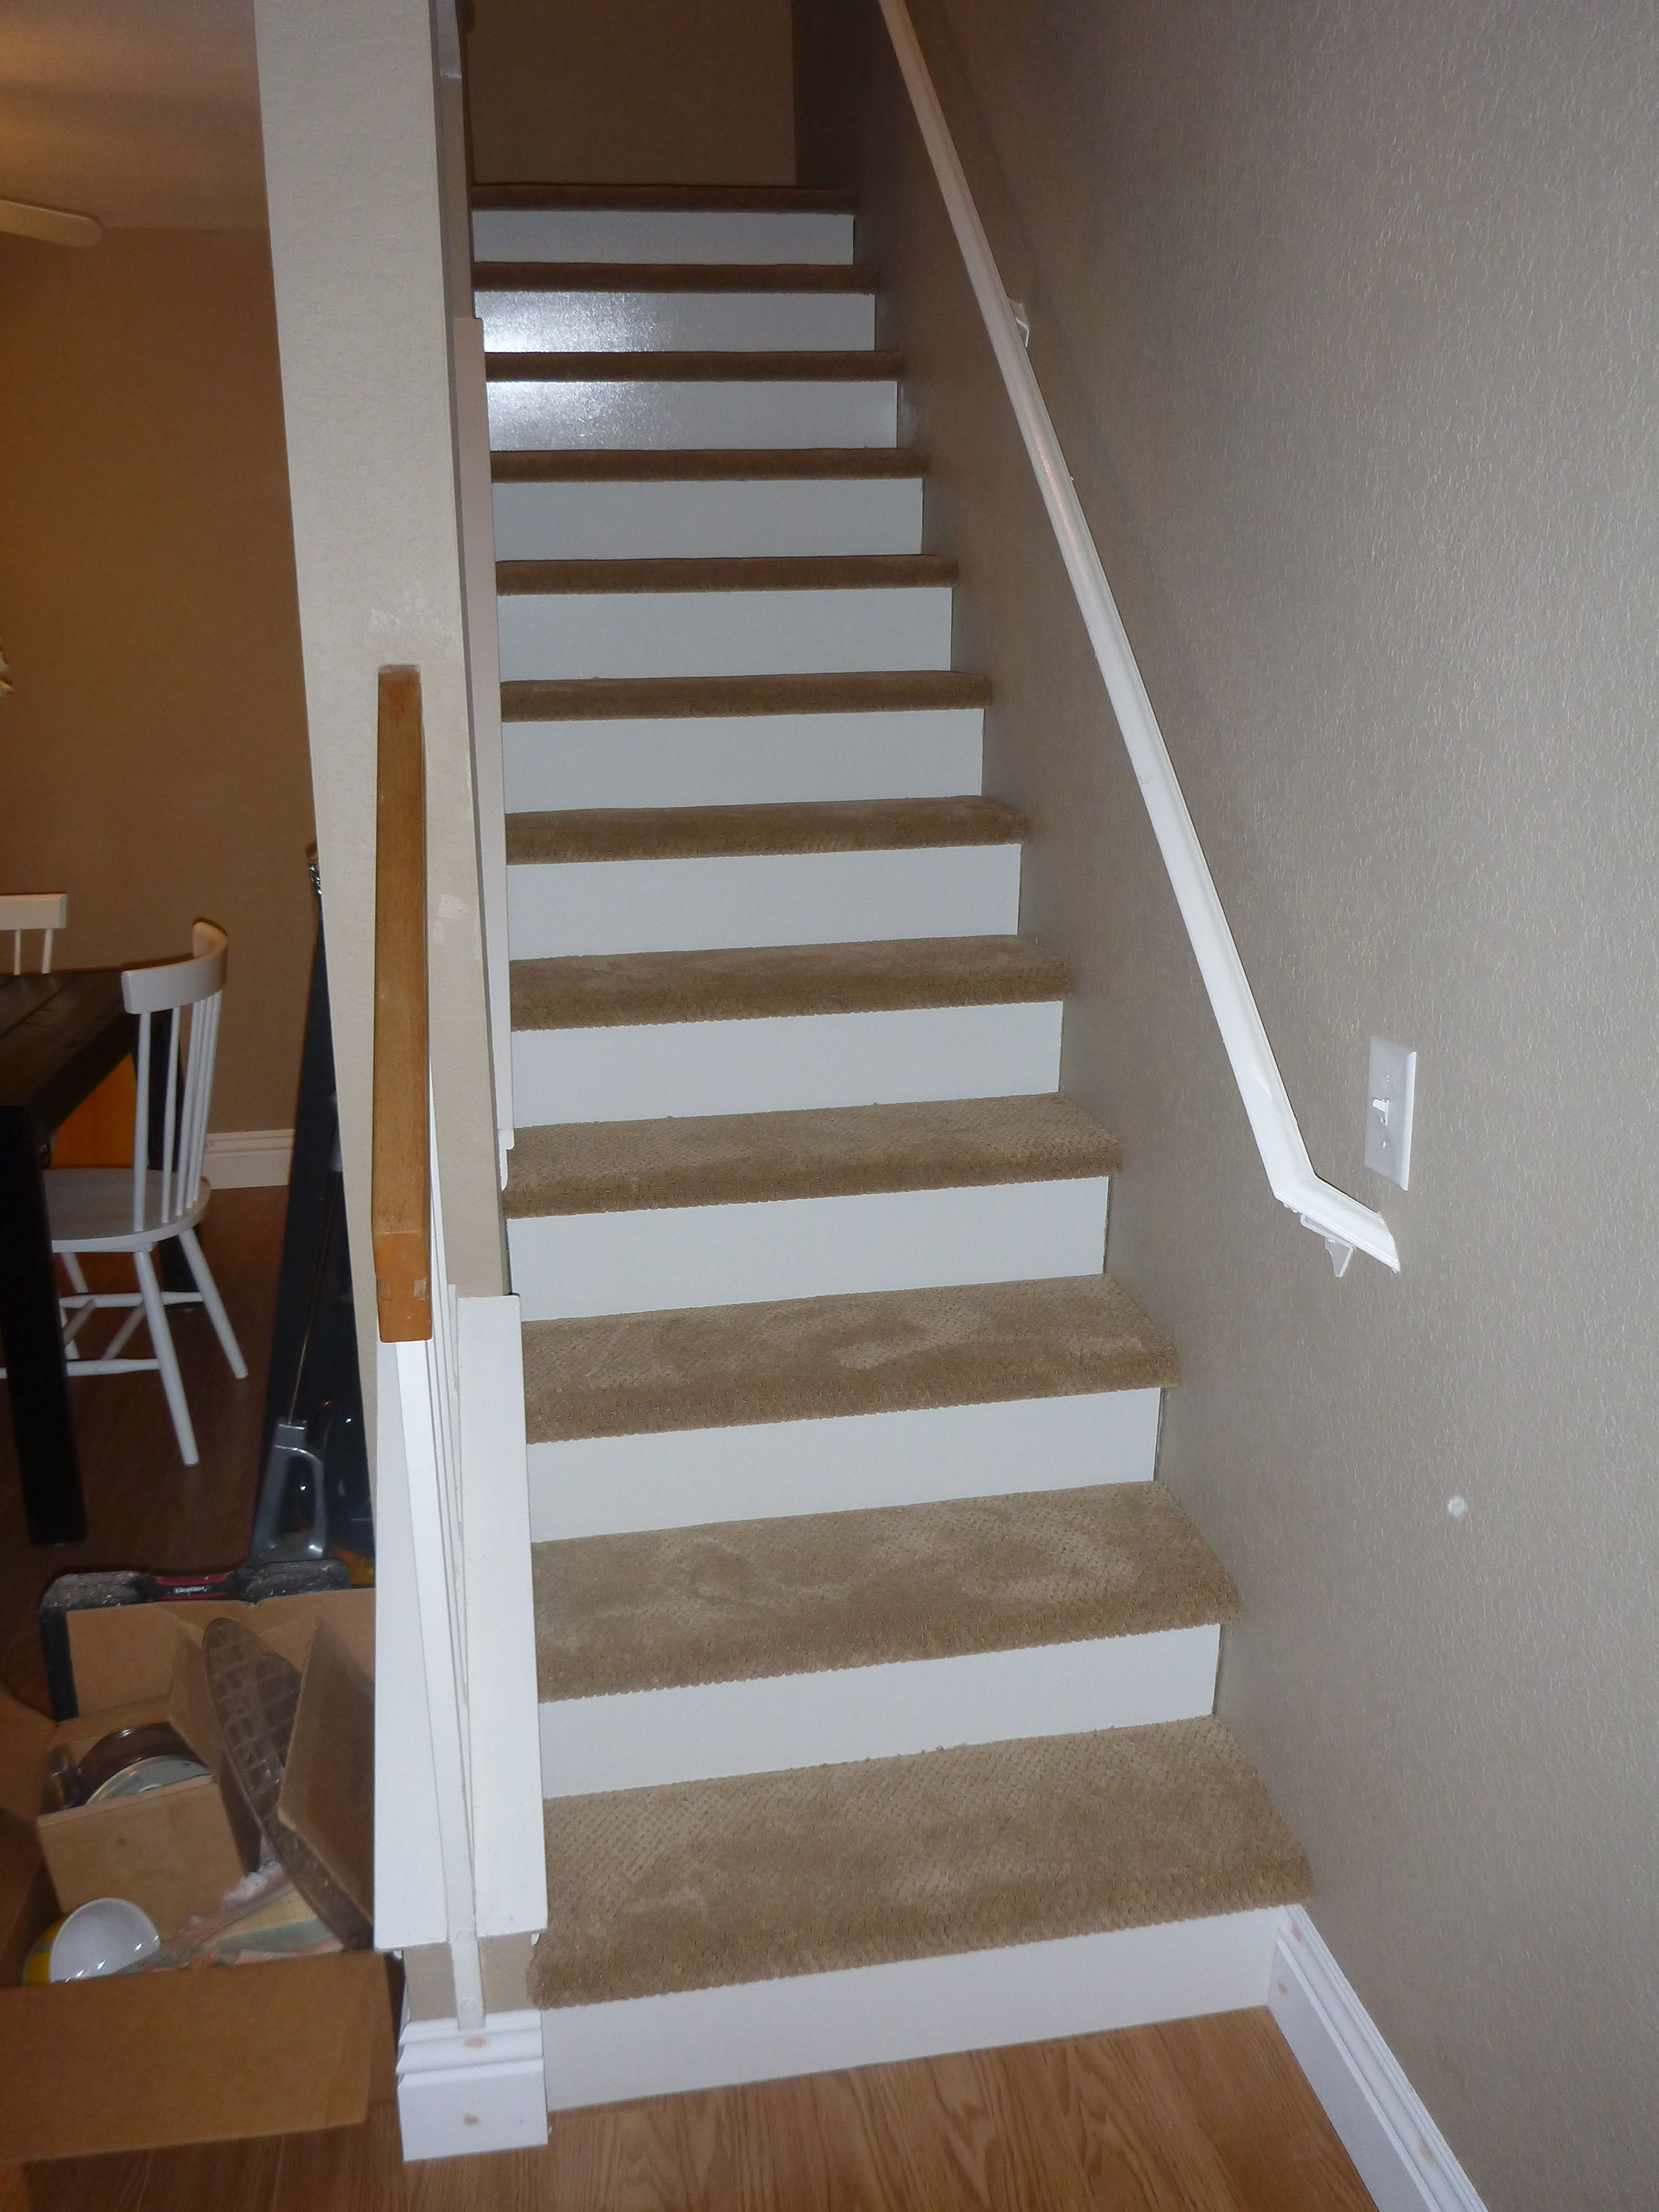 hardwood floor stairs images of our new stairs 1 8 inch wood white board cut and put on the rise pertaining to our new stairs 1 8 inch wood white board cut and put